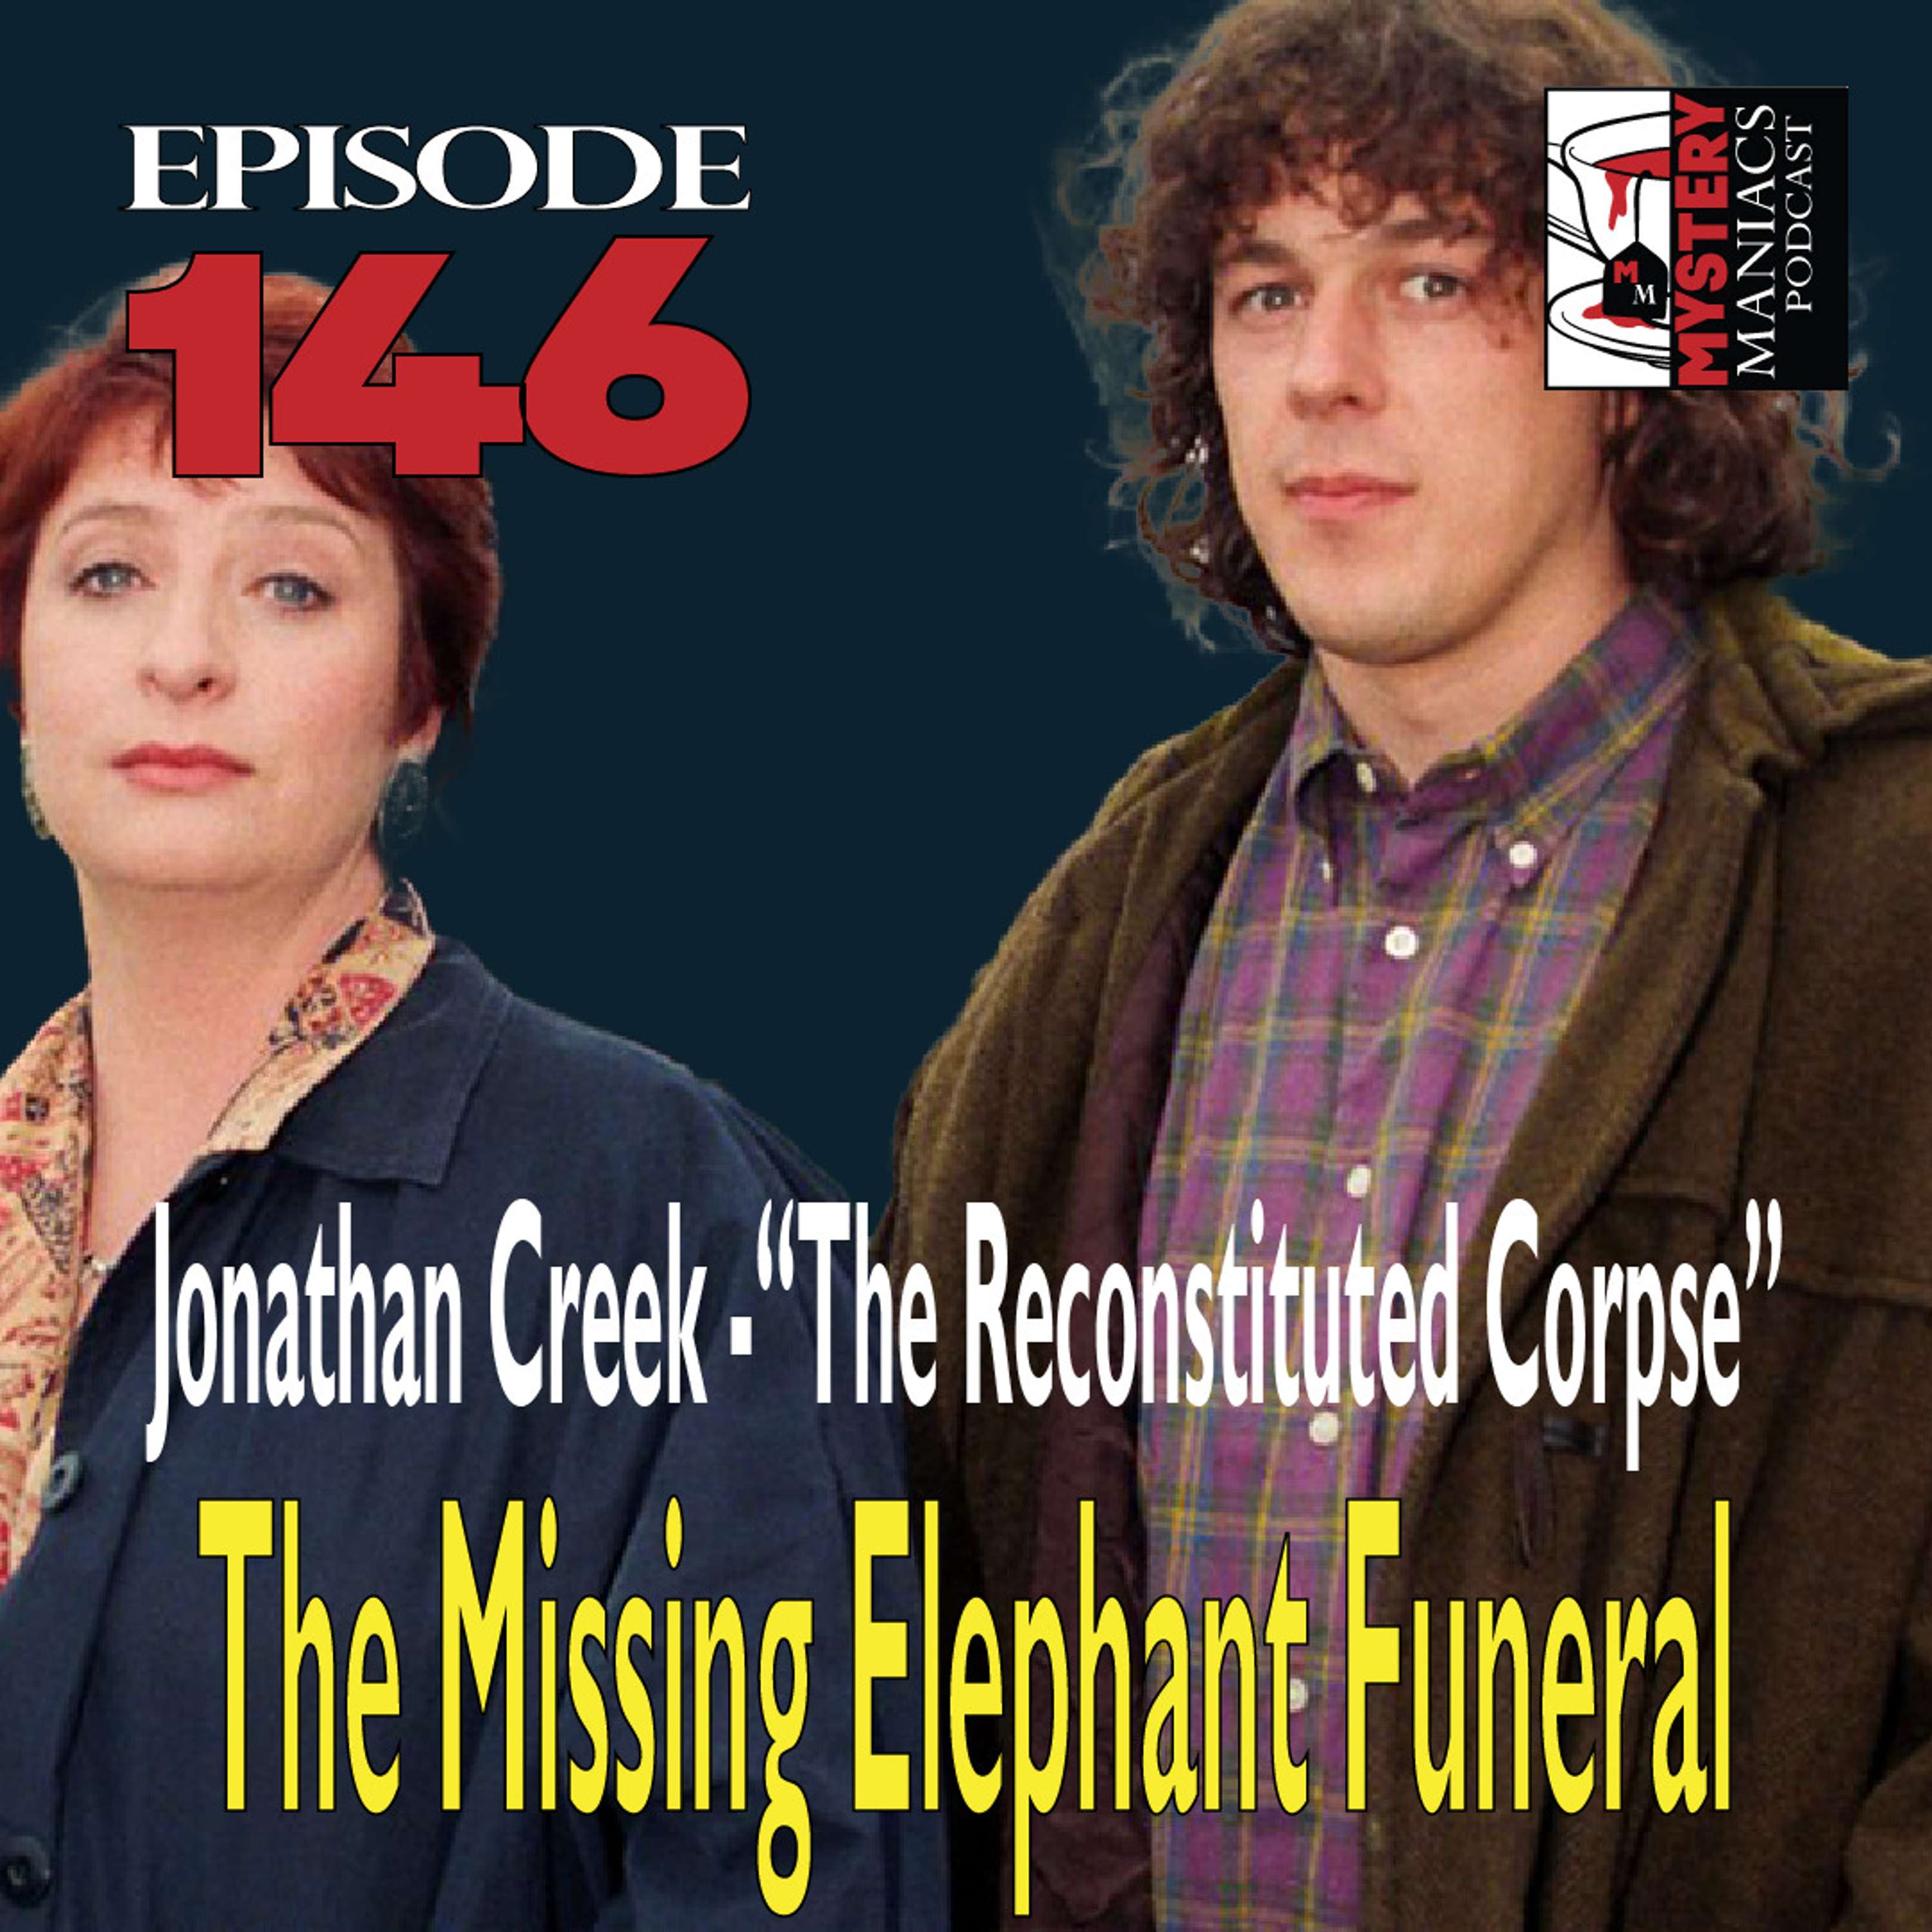 Episode 146 - Mystery Maniacs - Jonathan Creek - “The Reconstituted Corpse” - The Missing Elephant Funeral